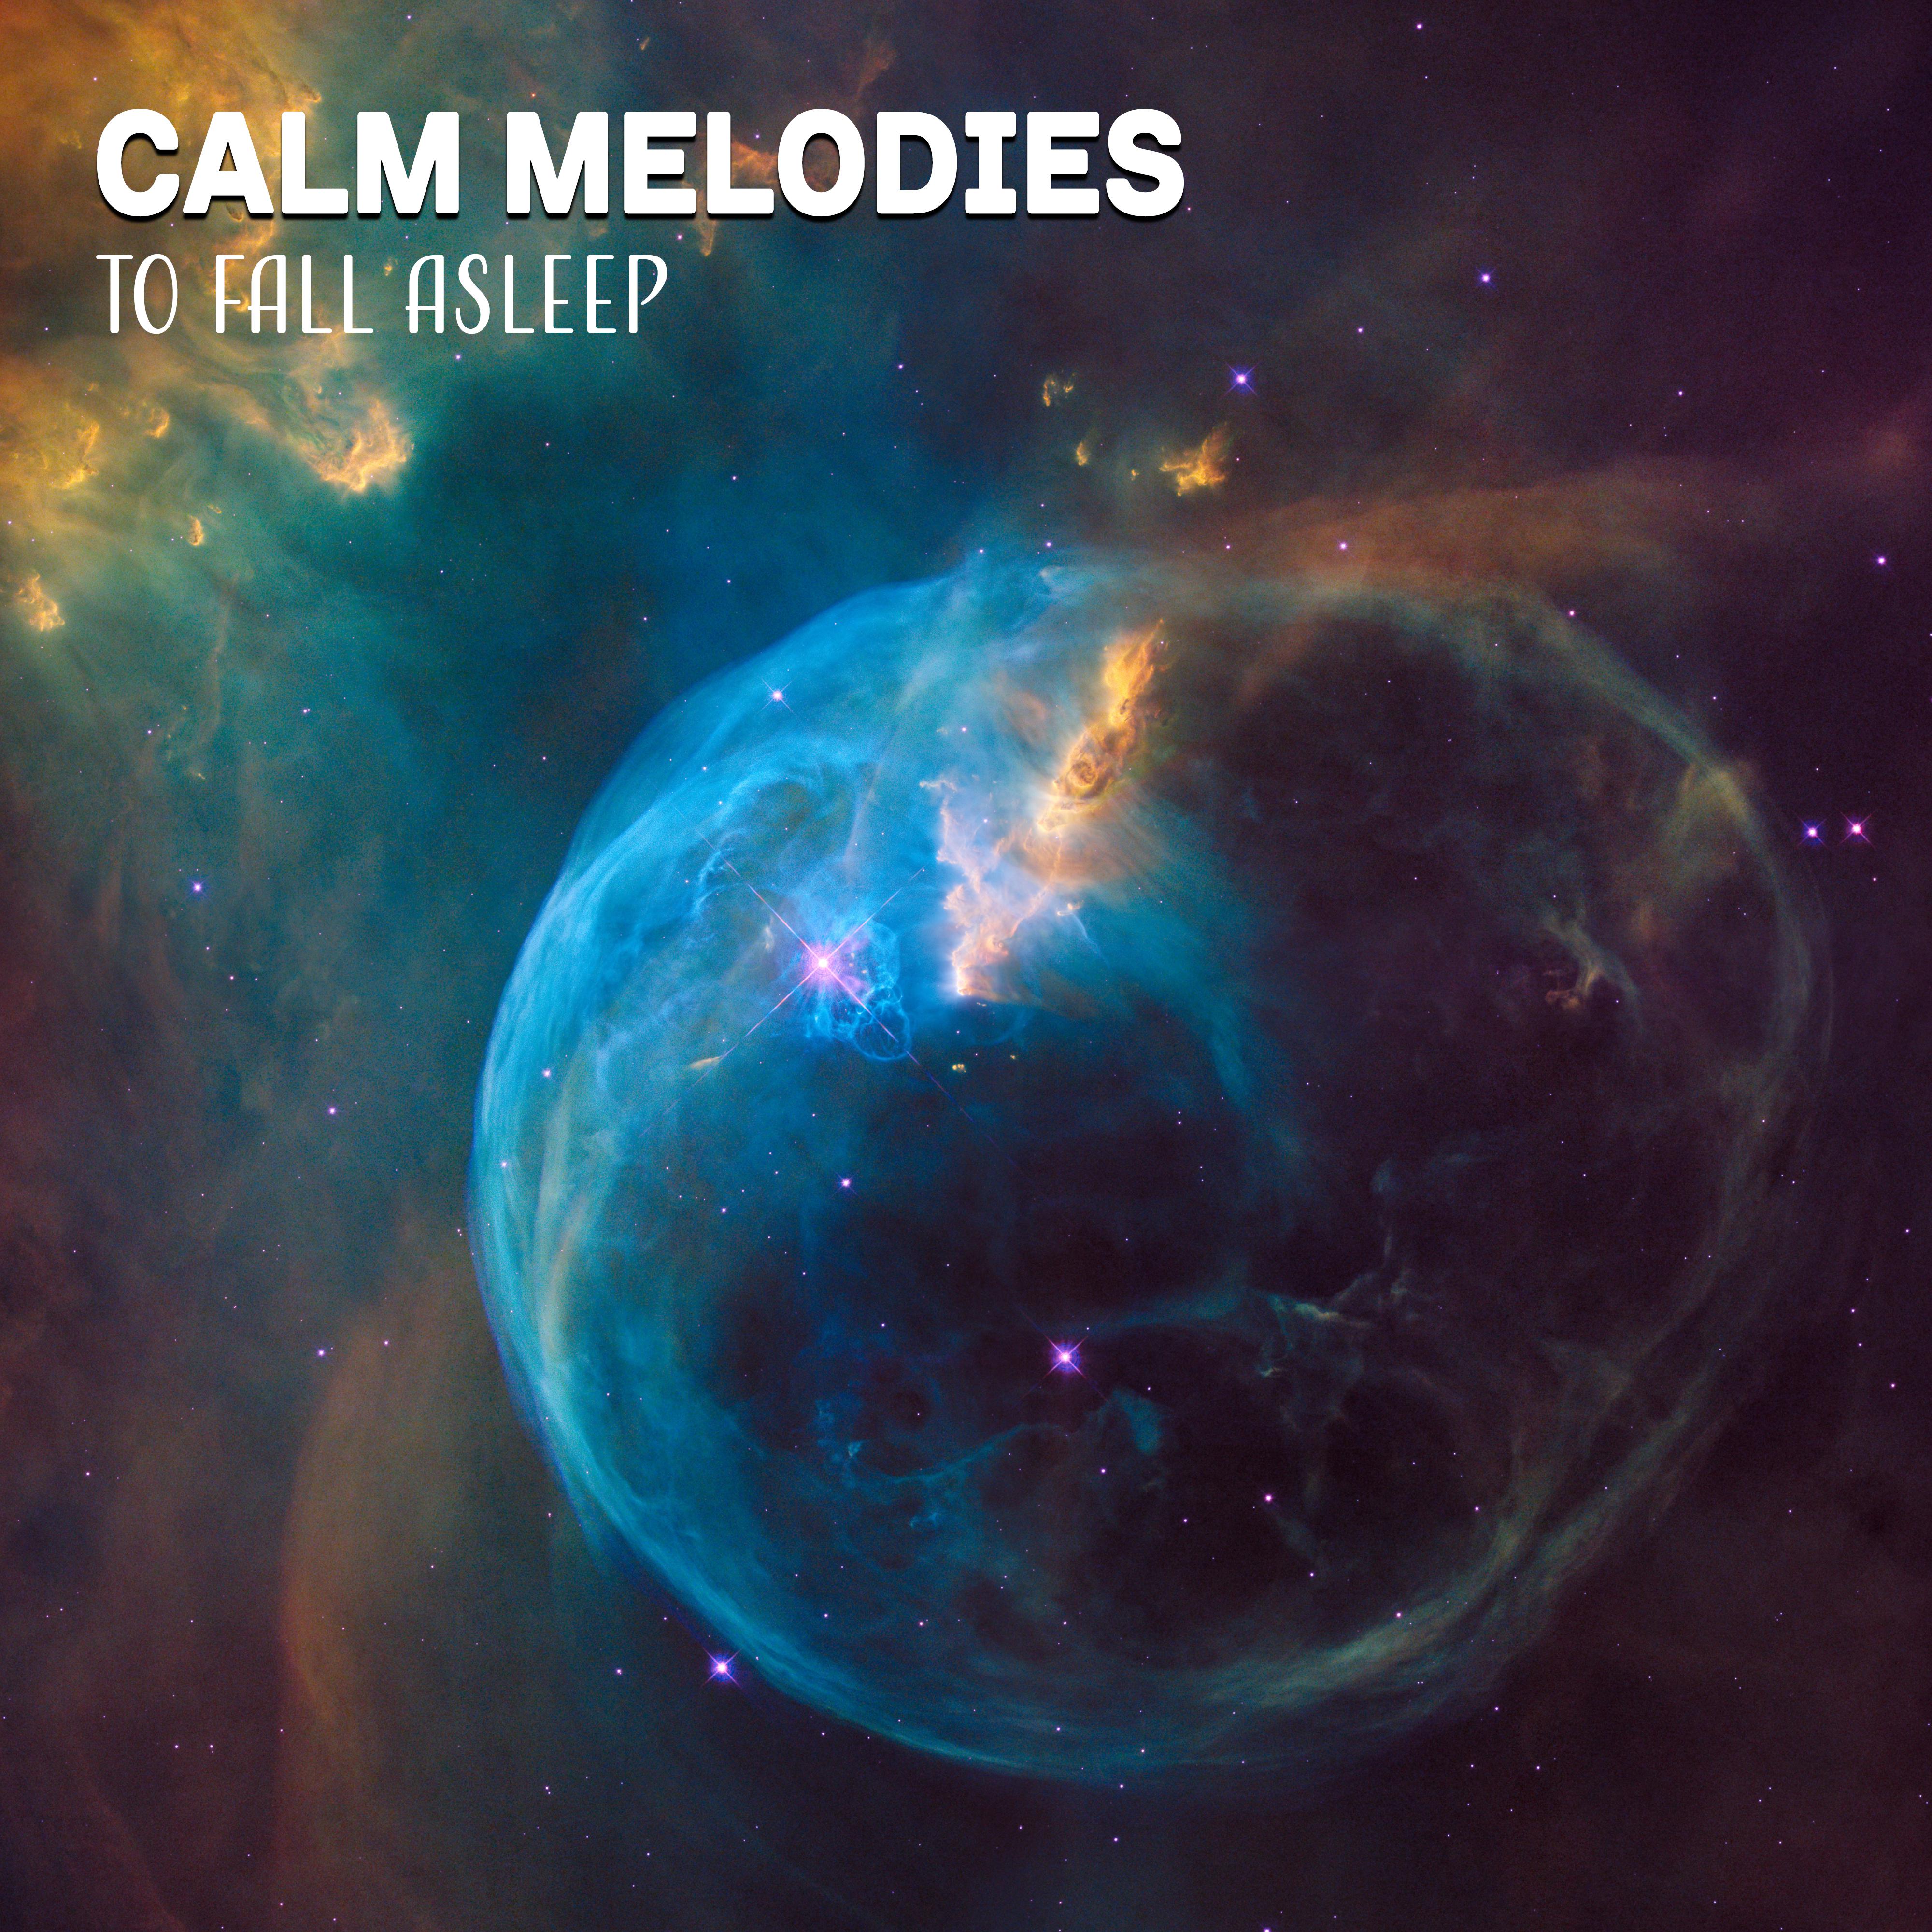 Calm Melodies to Fall Asleep  Soothing New Age Music, Stress Relief, Inner Calmness, Peaceful Night Songs